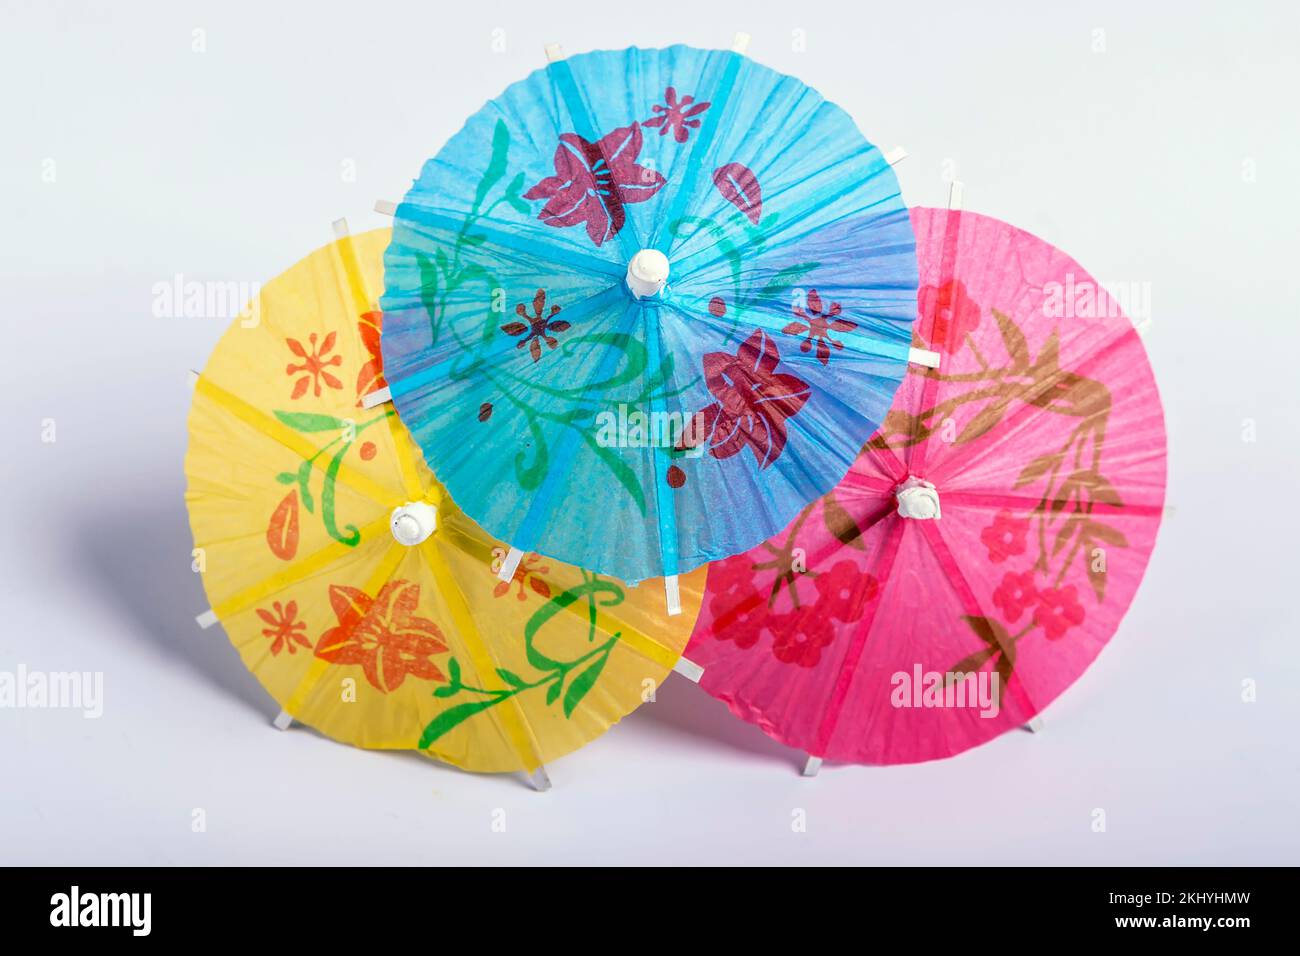 Three decorative paper umbrellas of three different colors against a white background Stock Photo